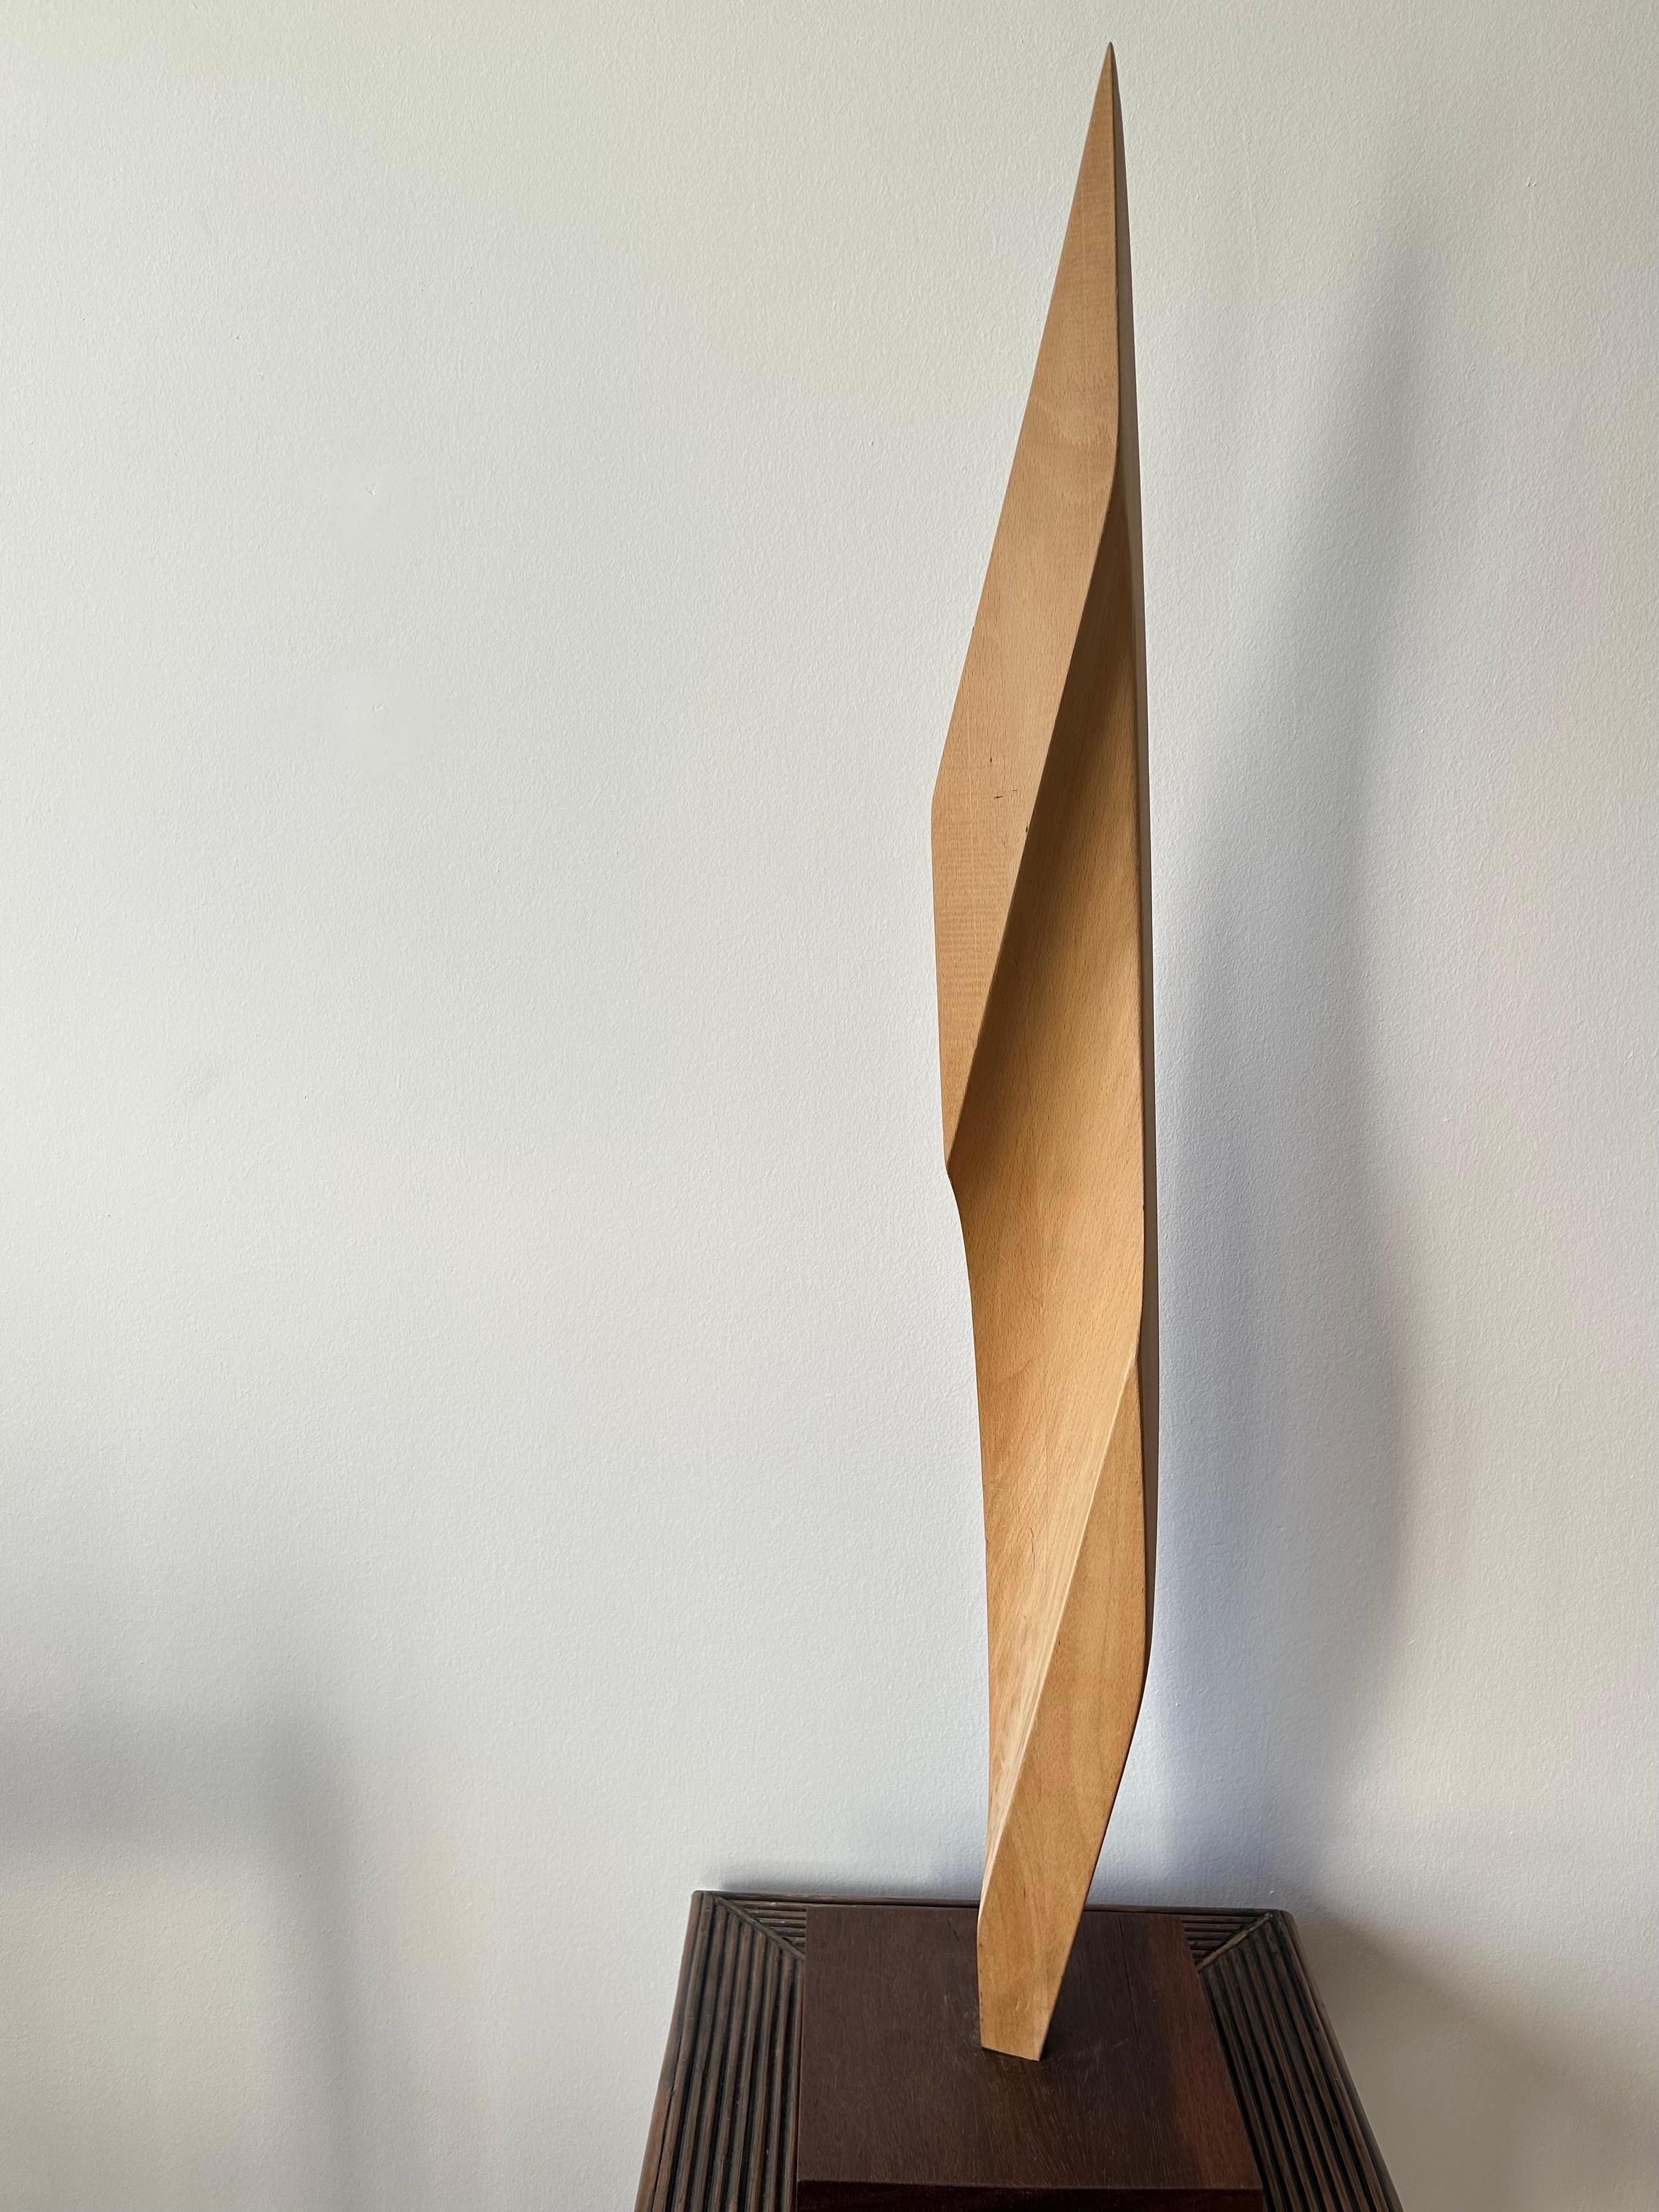 Mid-20th Century Scandinavian Abstract Wooden Sculpture, 1960s For Sale